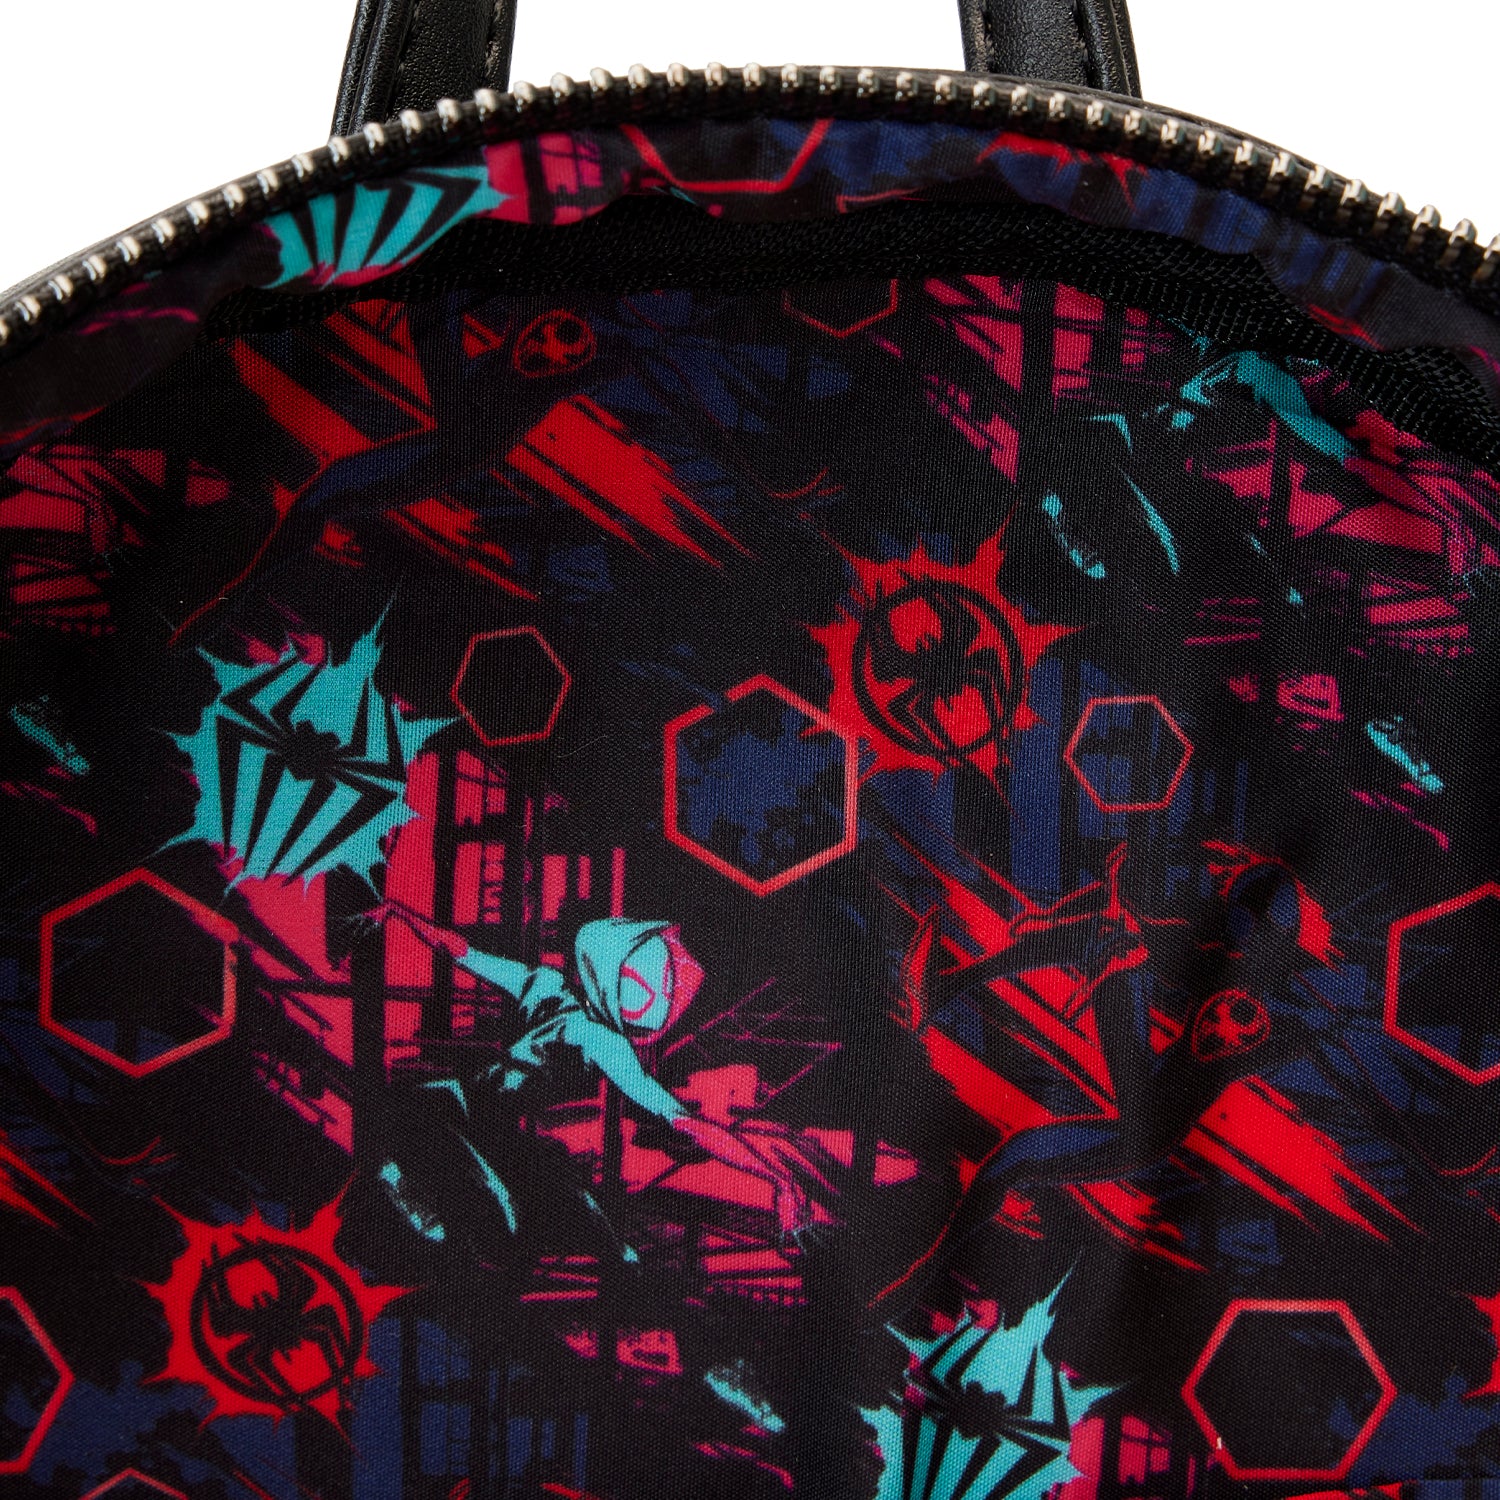 Loungefly Marvel Across the Spiderverse Lenticular Mini Backpack